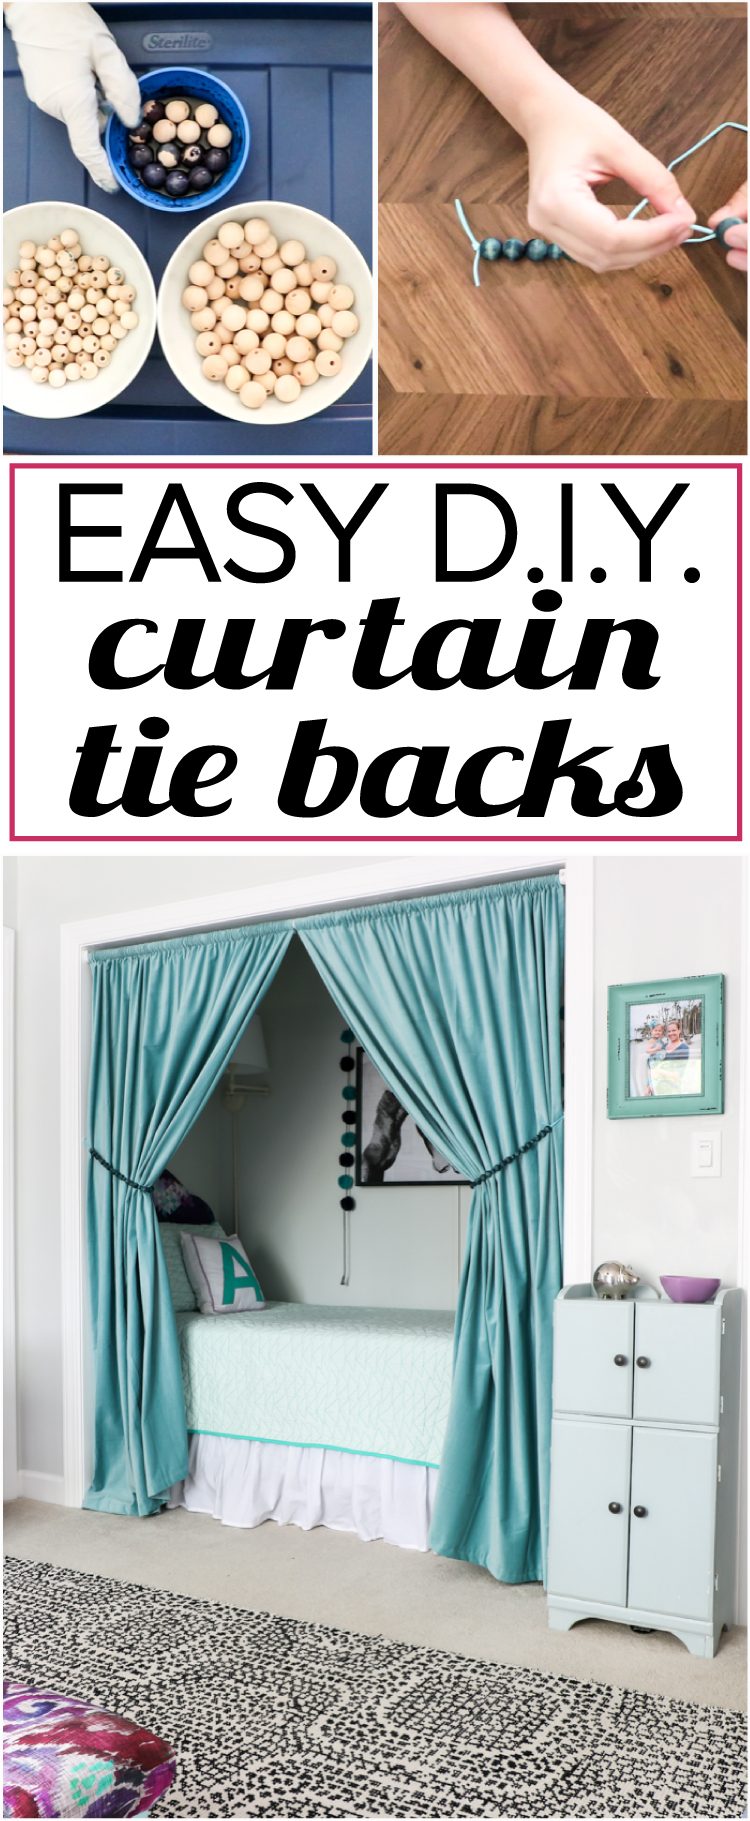 OMG, I absolutely love these DIY curtain tie backs and they are so much cuter than any store-bought curtain tie backs I have seen. Learn how to make your own curtain tie backs with this detailed tutorial. They only take about 15 minutes to make!